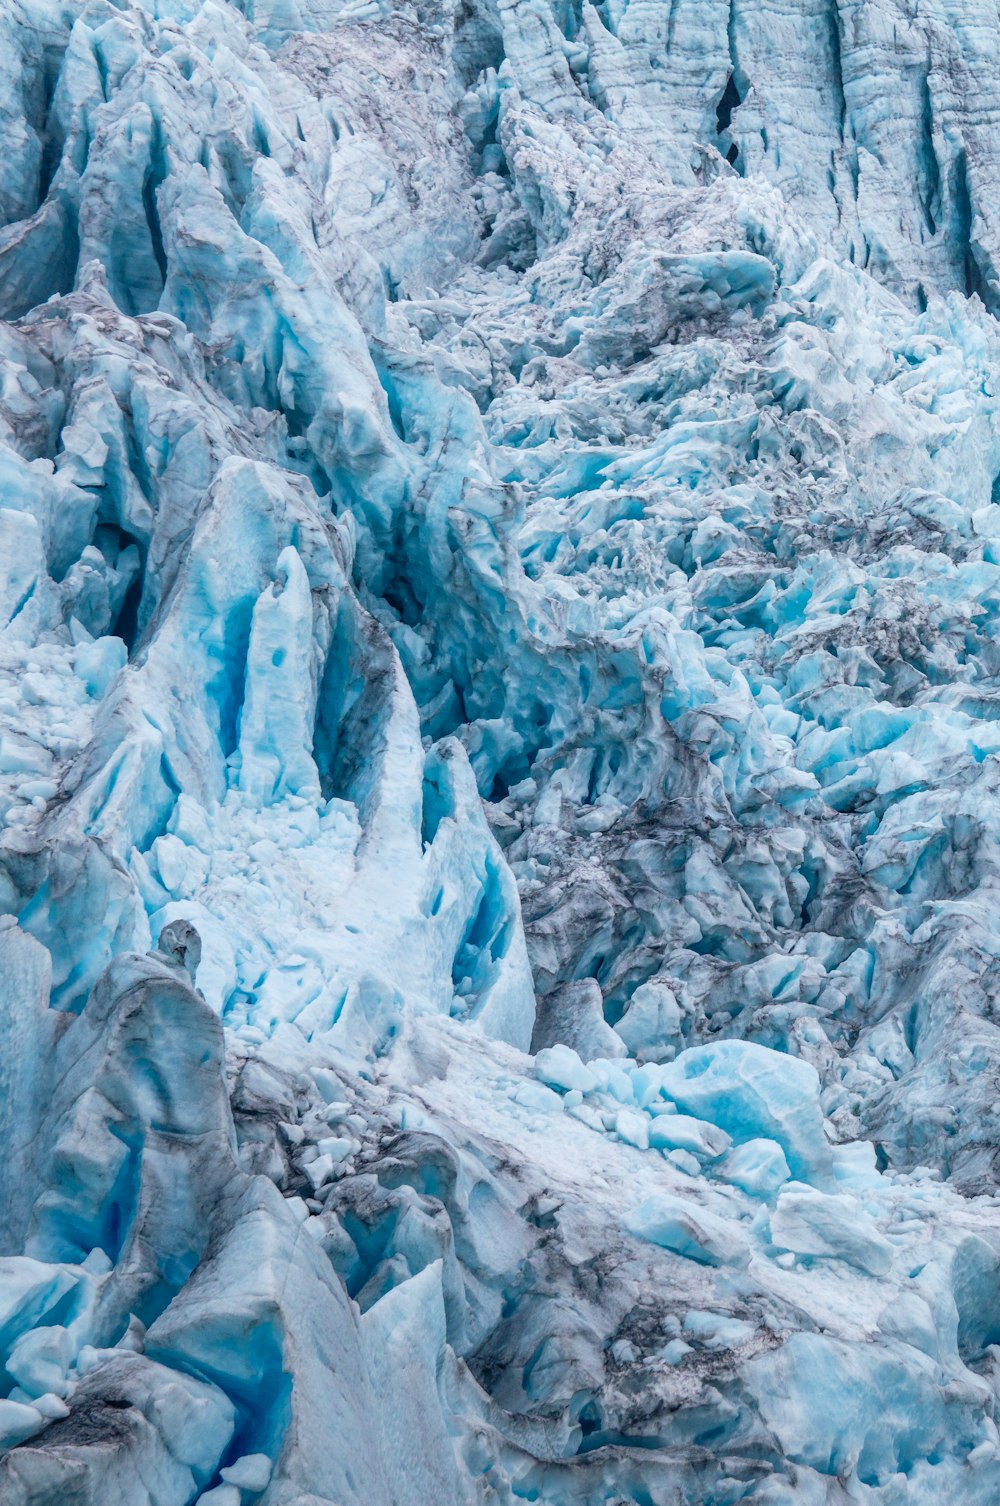 a large group of ice formations